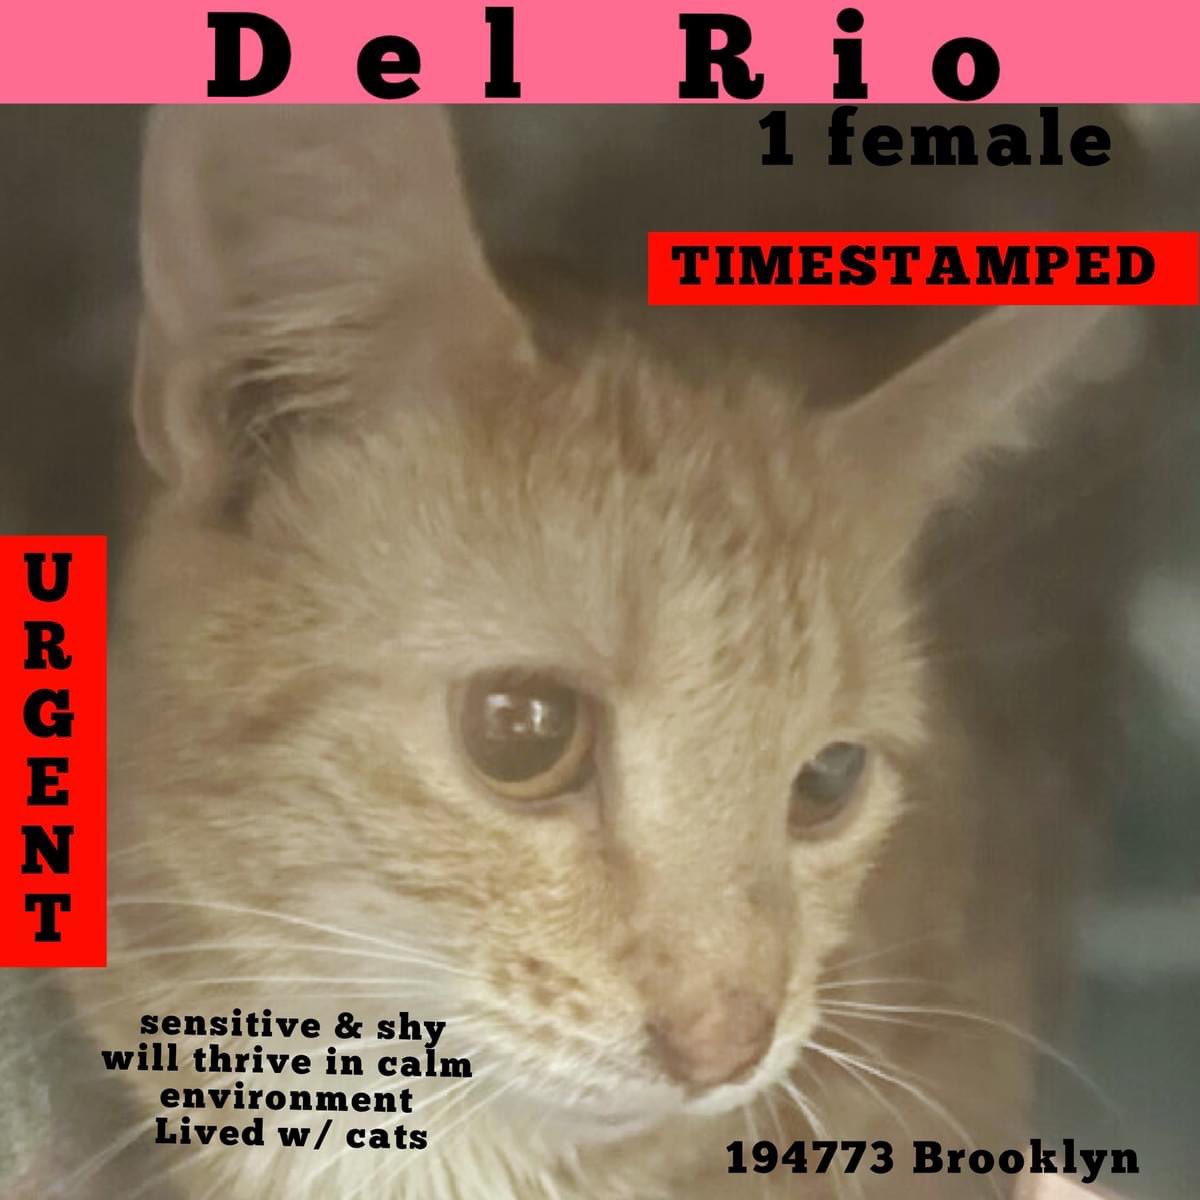 🆘Please RT-adopt-foster! 🆘 DEL RIO is on the “emergency placement” list at #ACCNYC and needs out of the shelter by 12 NOON 4/20! #URGENT #NYC #CATS #NYCACC #TeamKittySOS #AdoptDontShop #CatsOfTwitter newhope.shelterbuddy.com/Animal/Profile…